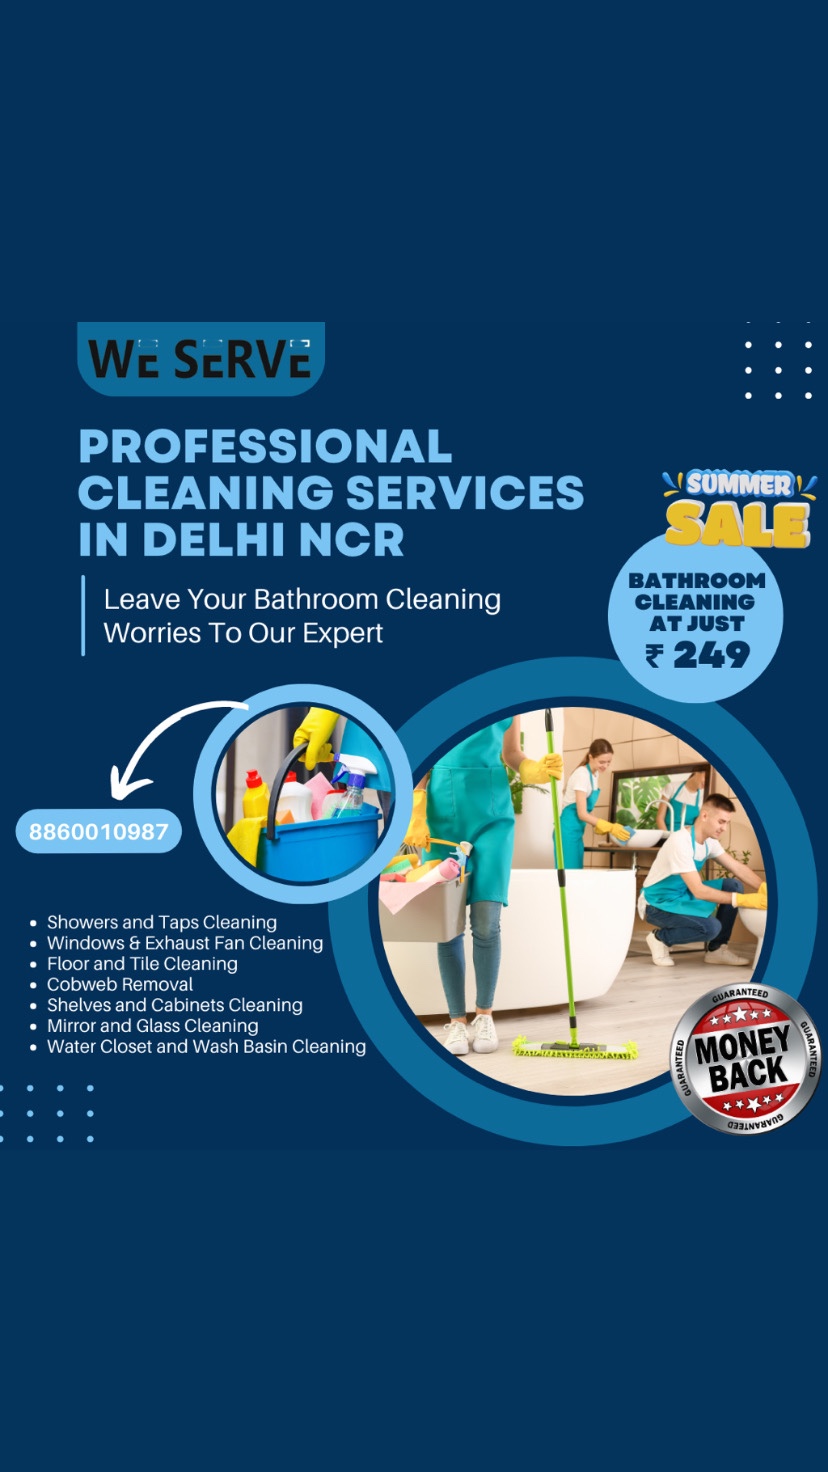 Bathroom Cleaning Services at Just Rs 249/-